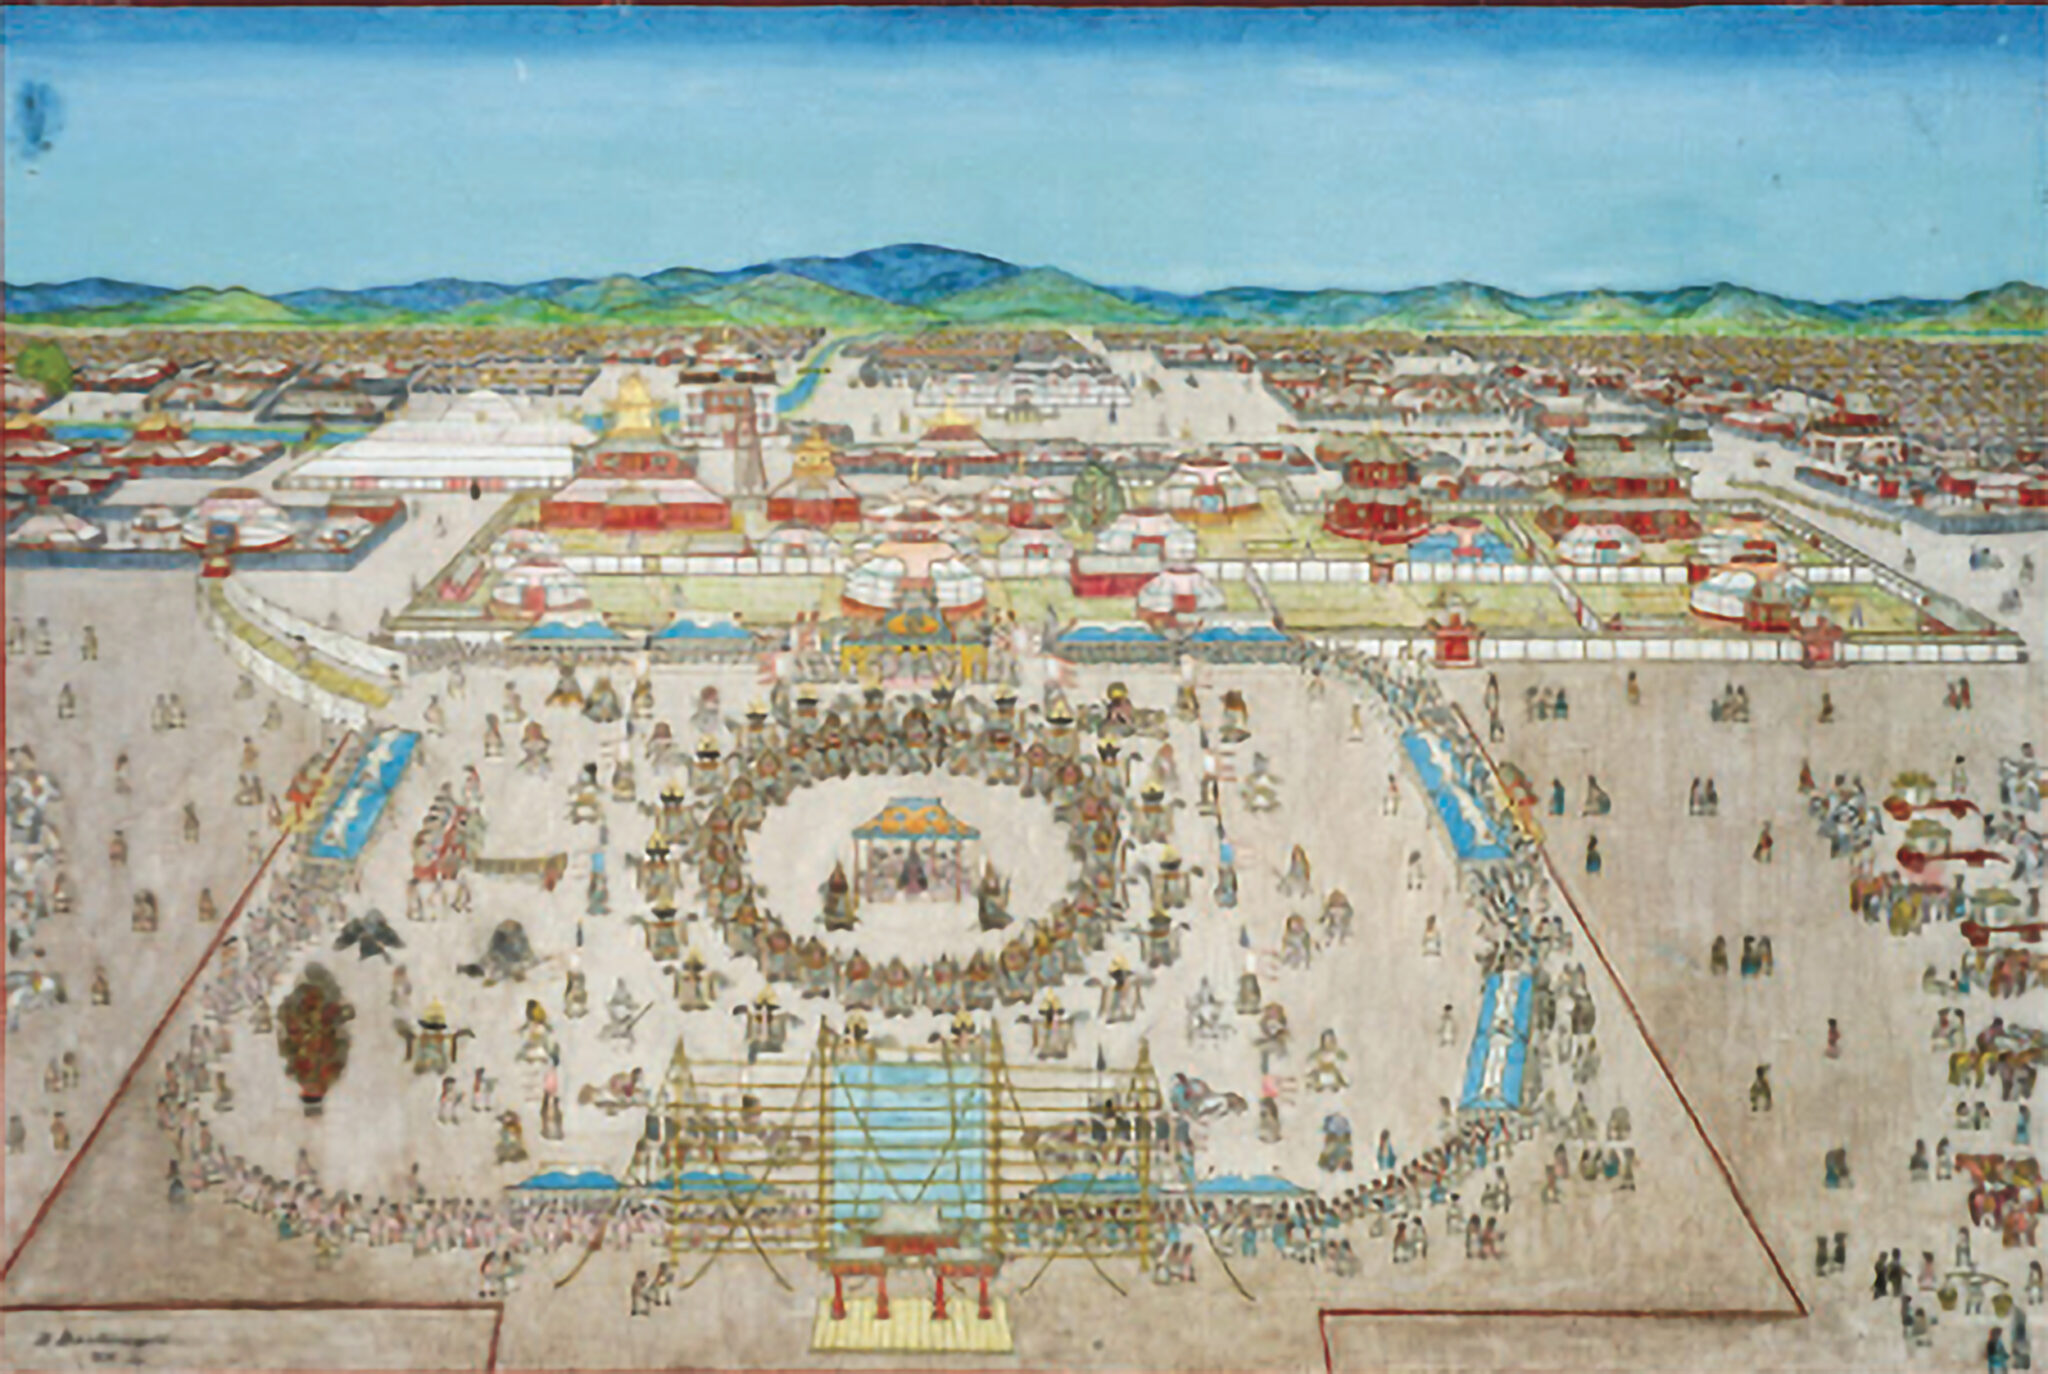 Bird’s-eye-view of crowd assembled in circular formation on plaza before walled building complex